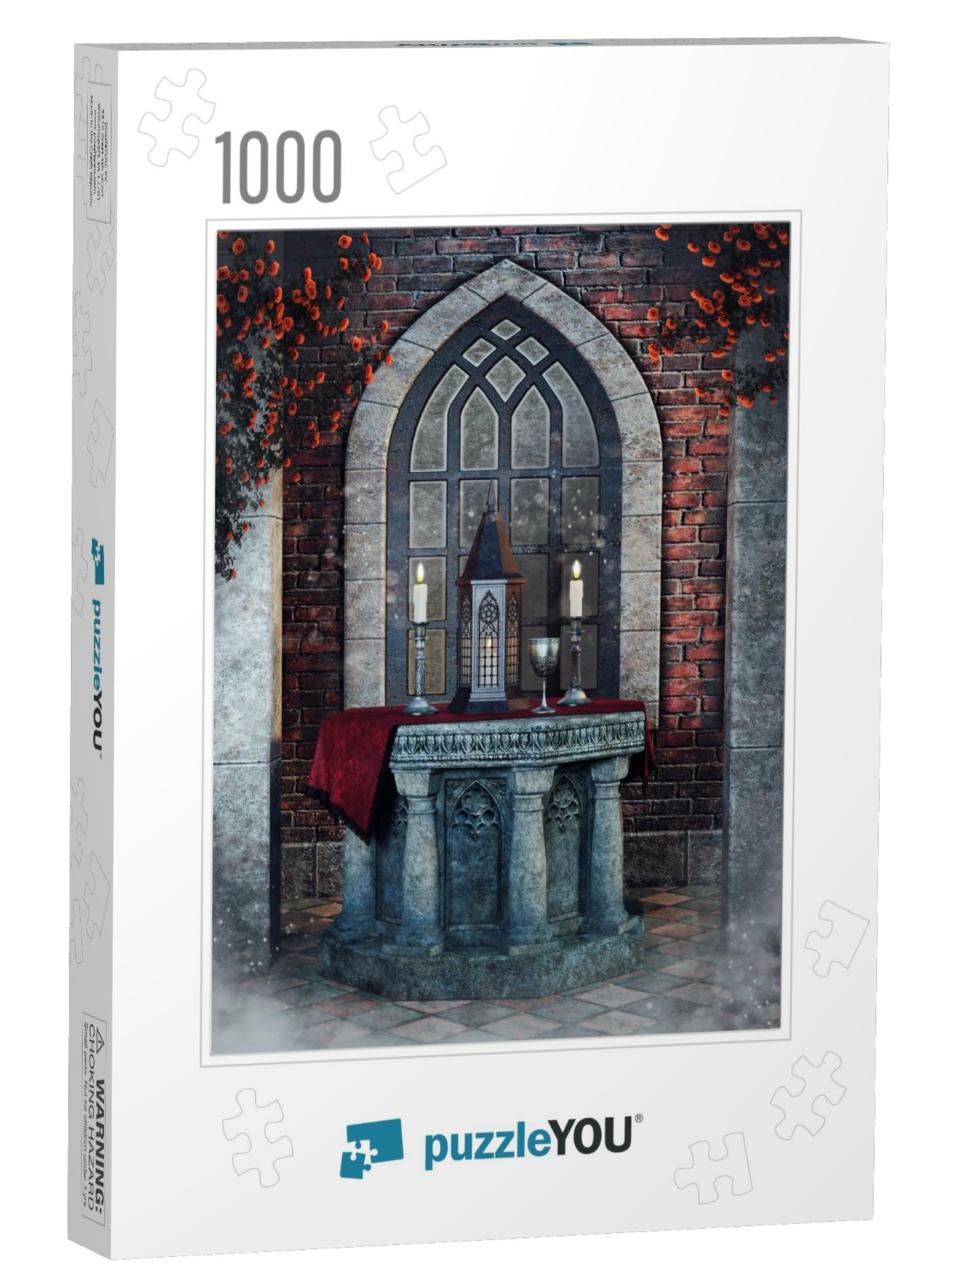 Fantasy Stone Altar with Candles & Goblet in Front of a G... Jigsaw Puzzle with 1000 pieces